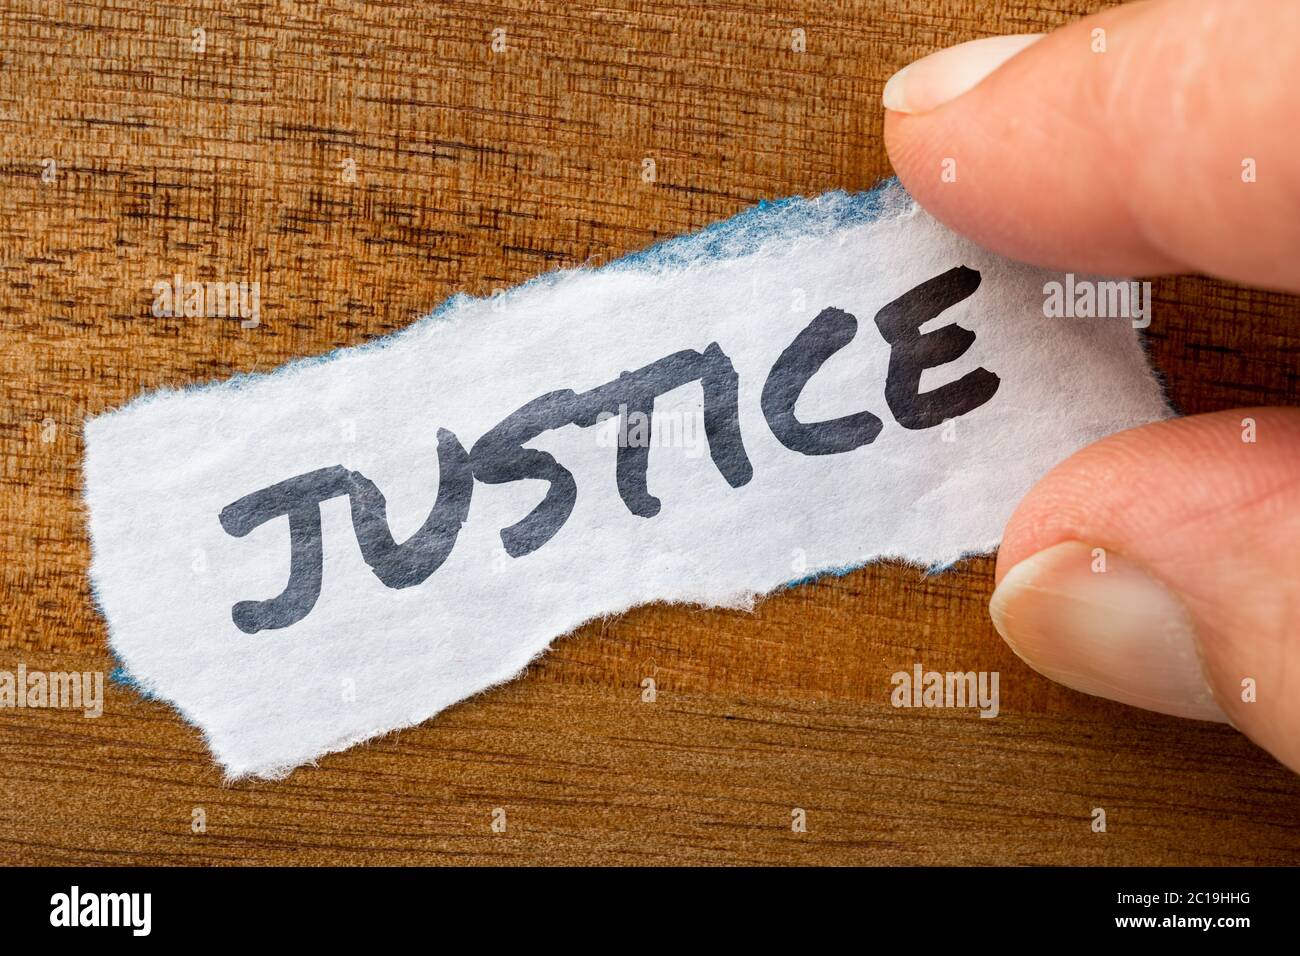 Justice concept and theme written on old paper on a grunge background Stock Photo